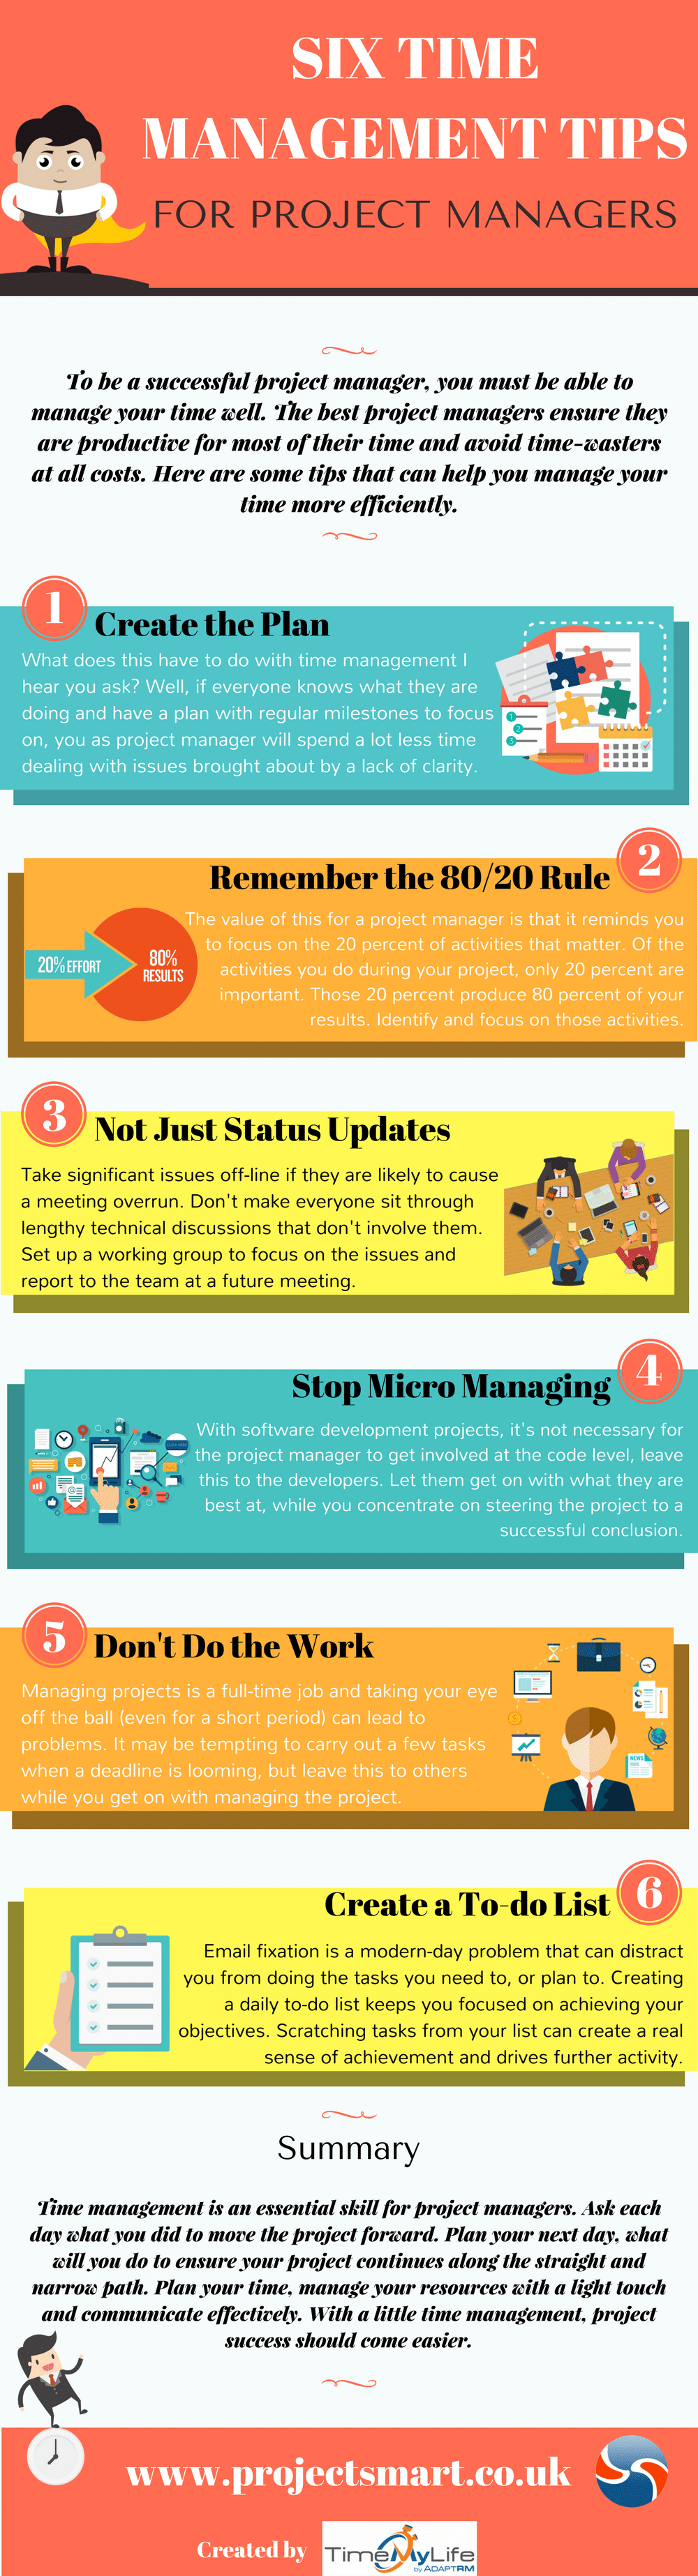 Six Time Management Tips Infographic